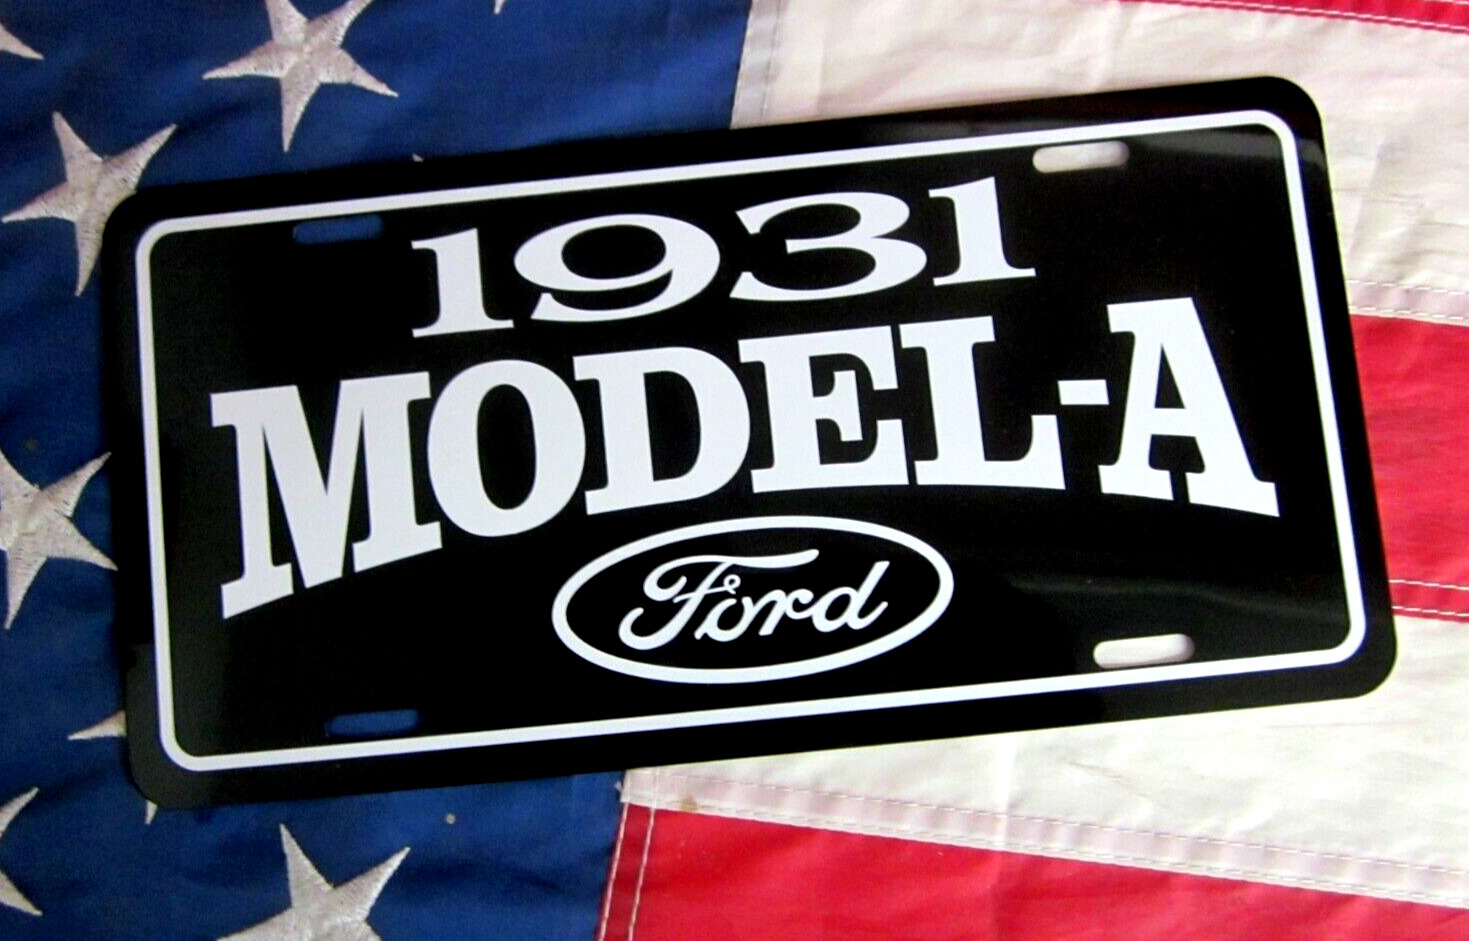 1931 Ford MODEL A  License plate car tag Hot Rod Roadster 31 Coupe Pickup Truck